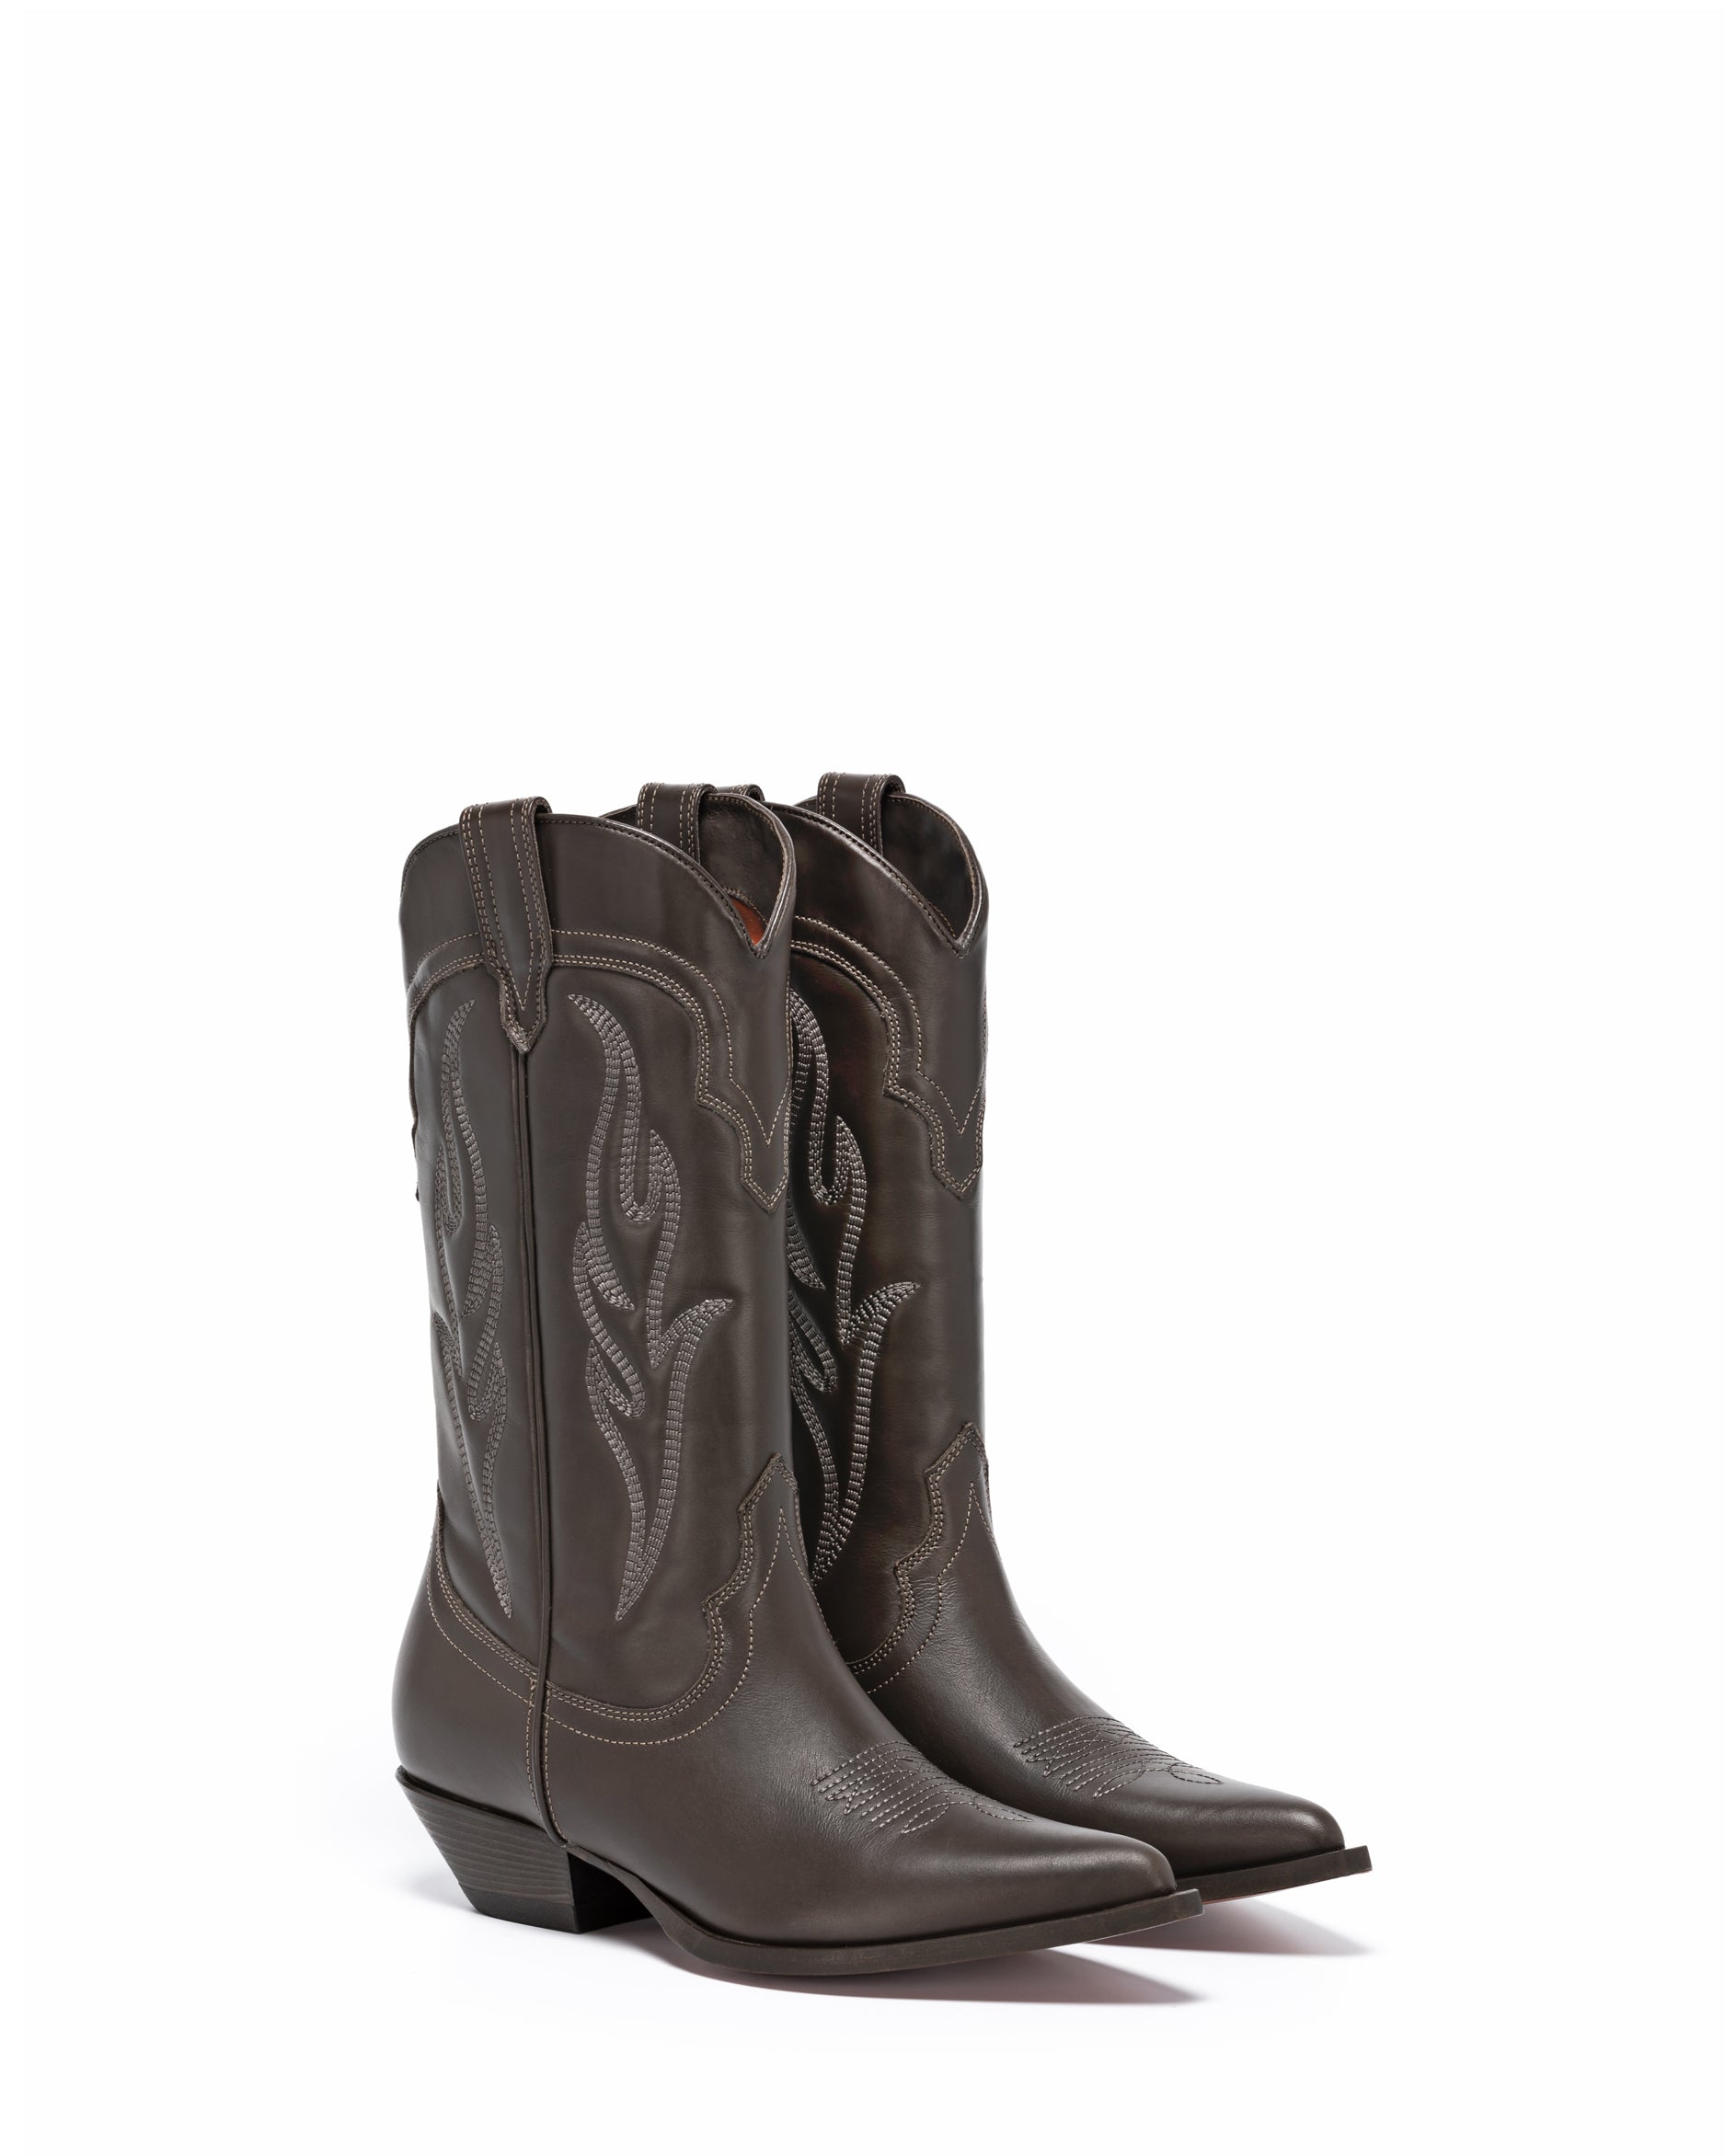 SANTA FE Men's Cowboy Boots in Brown Calfskin | On Tone Embroidery_Front_01